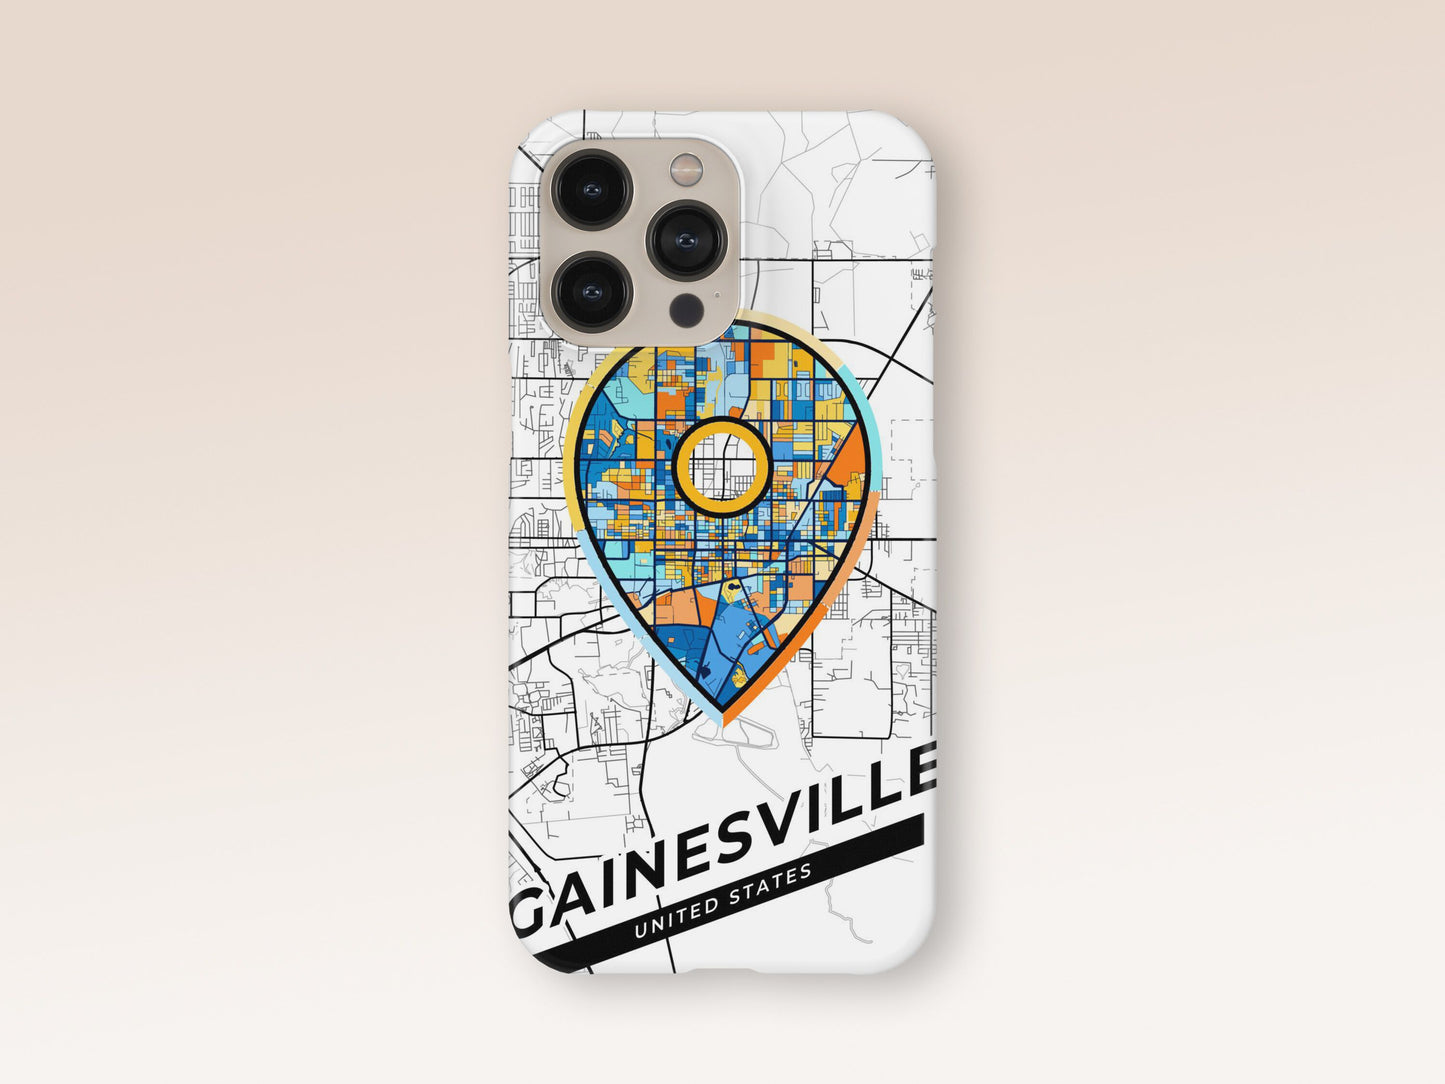 Gainesville Florida slim phone case with colorful icon. Birthday, wedding or housewarming gift. Couple match cases. 1